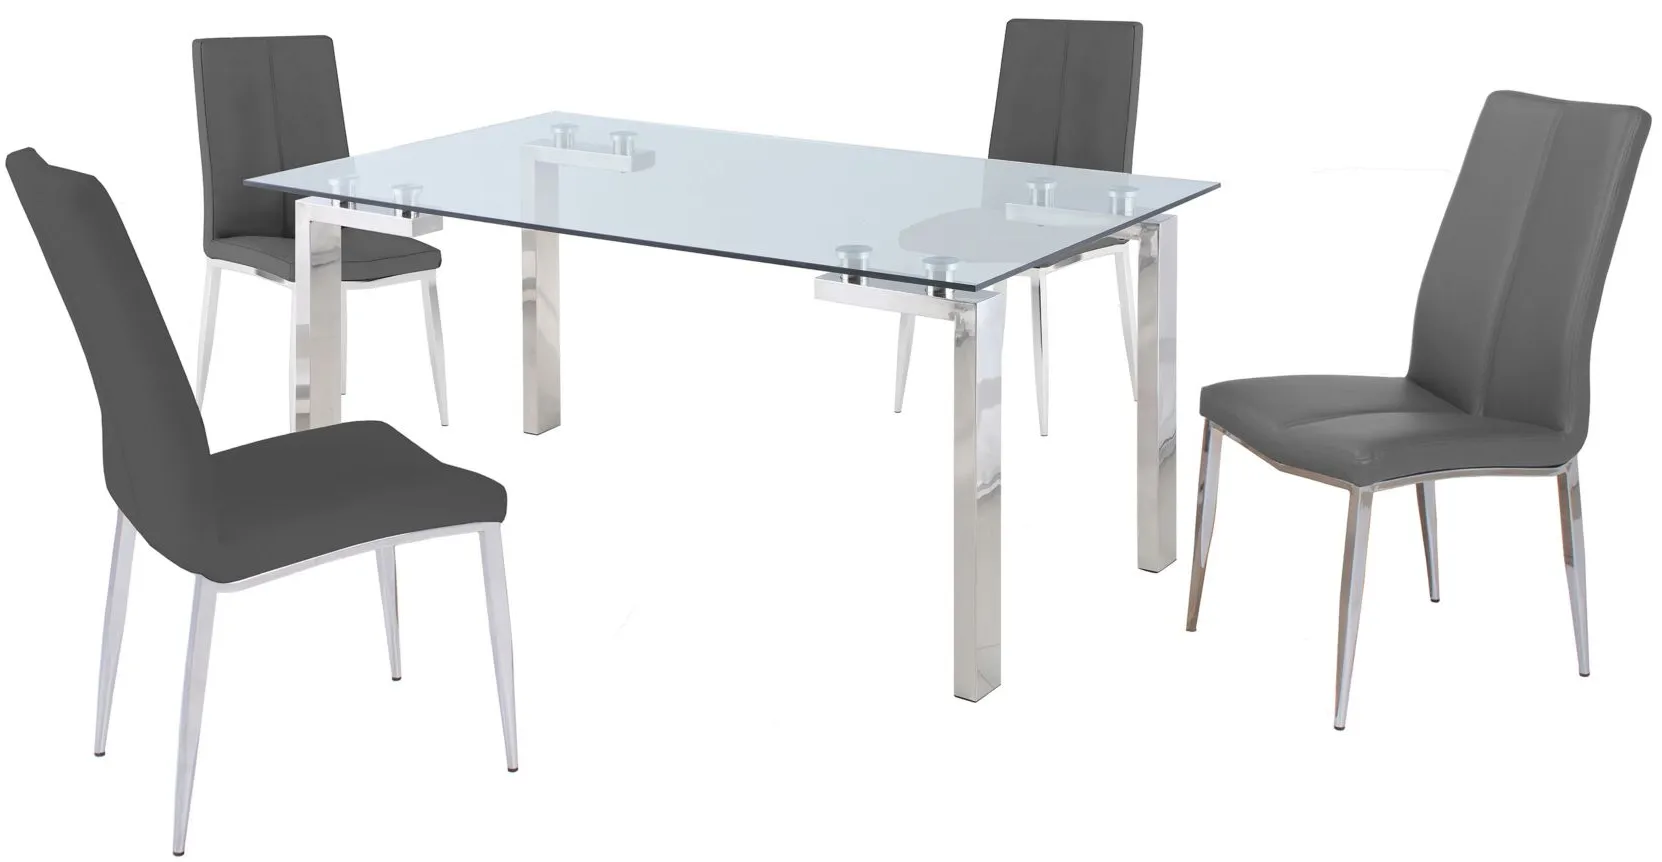 Cristina 5-pc. Dining Set in Gray by Chintaly Imports